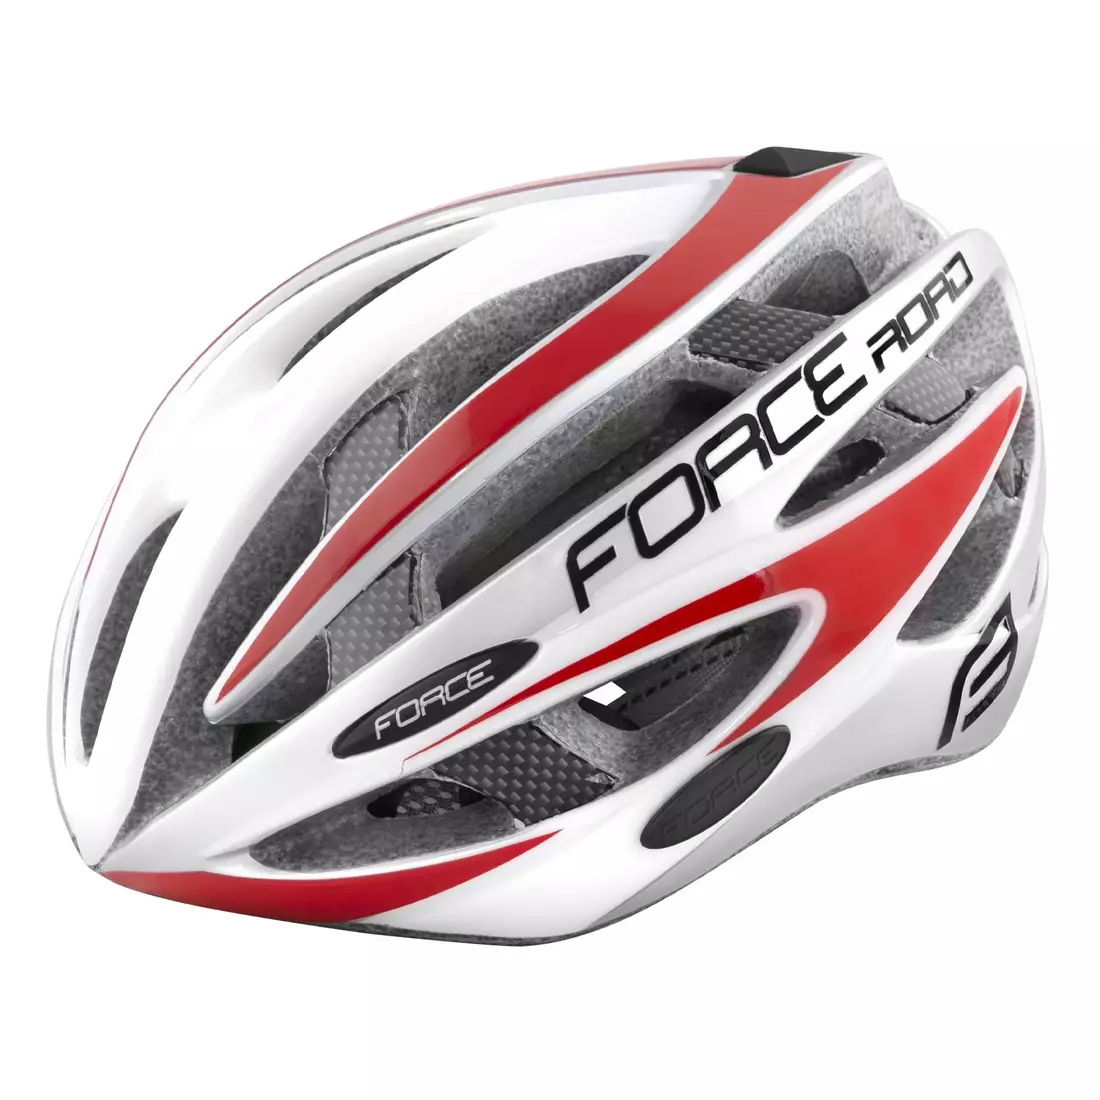 FORCE Fahrradhelm ROAD white/red 9026191